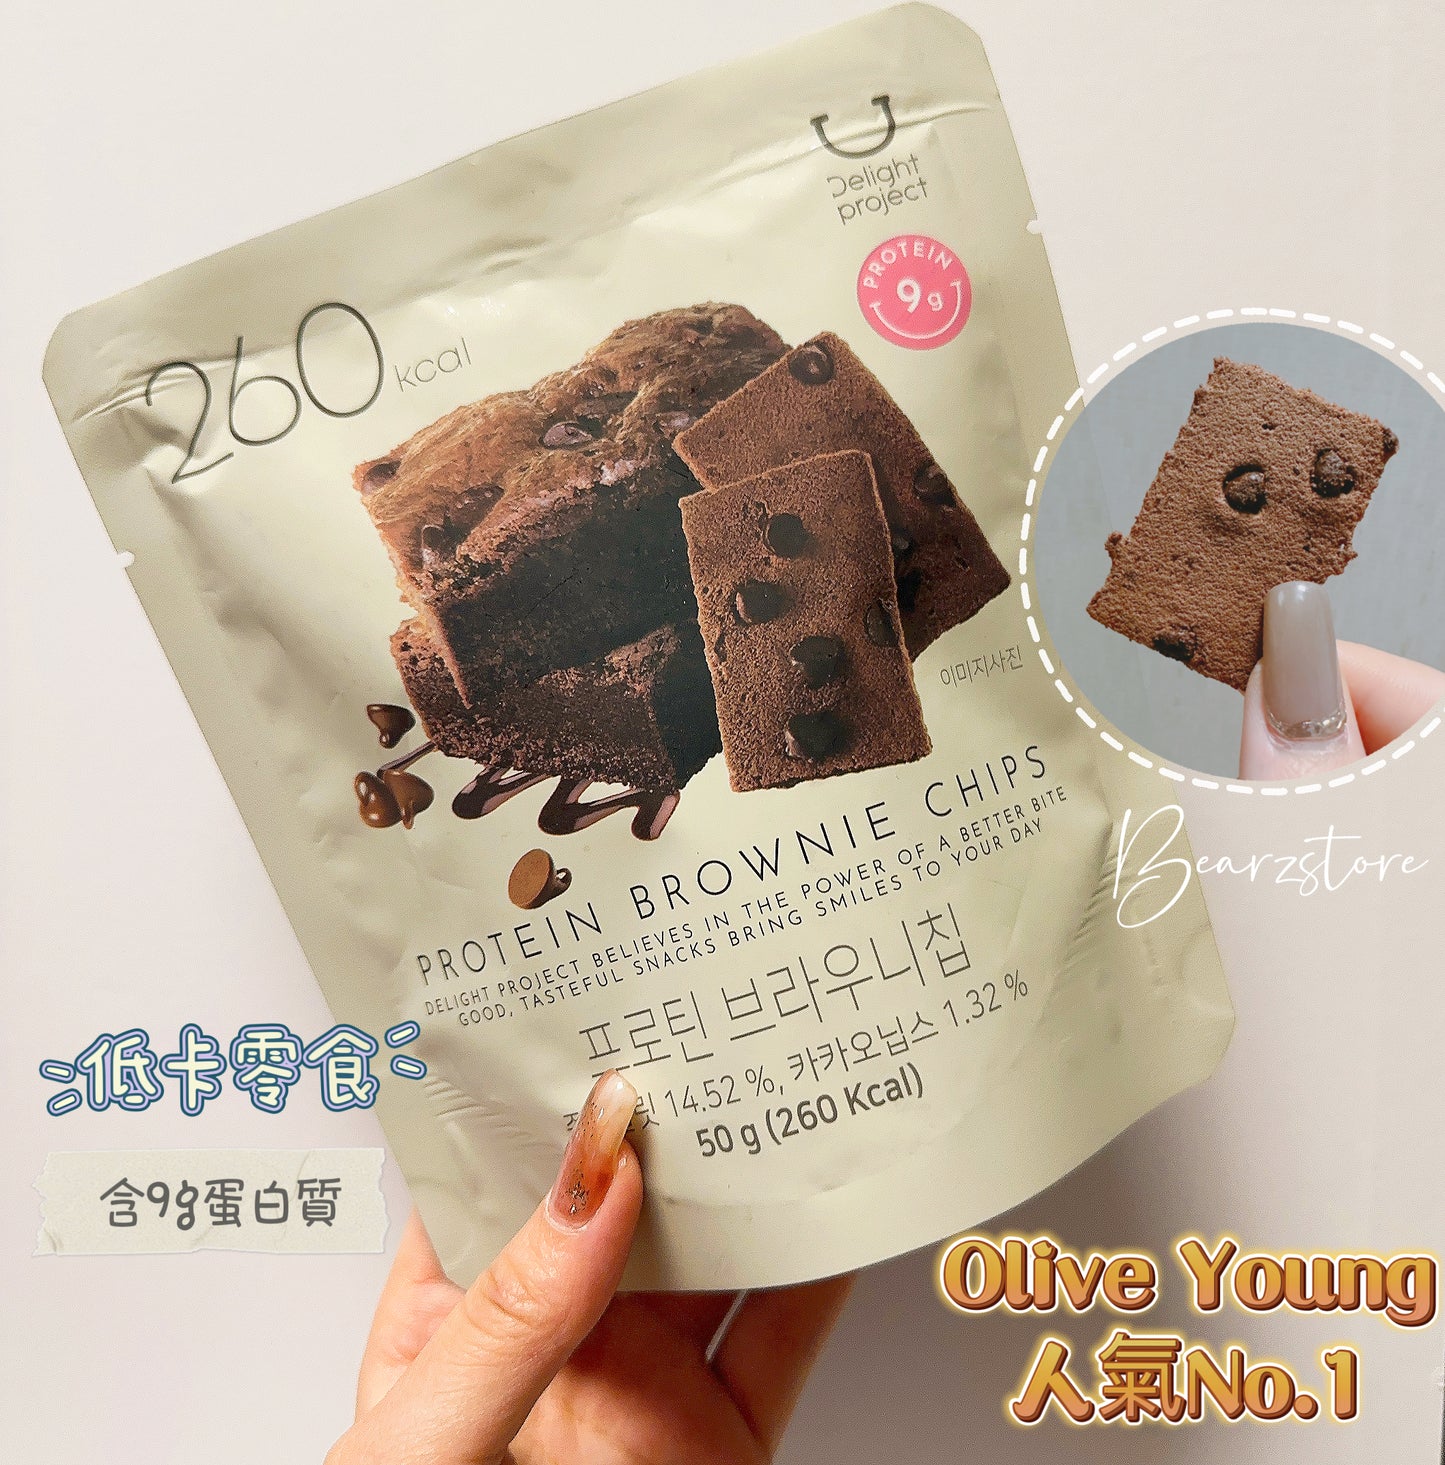 Olive Young 人氣No.1熱賣低卡零食🎶Delight Project Protein Chip 低卡高蛋白餅乾 🍪